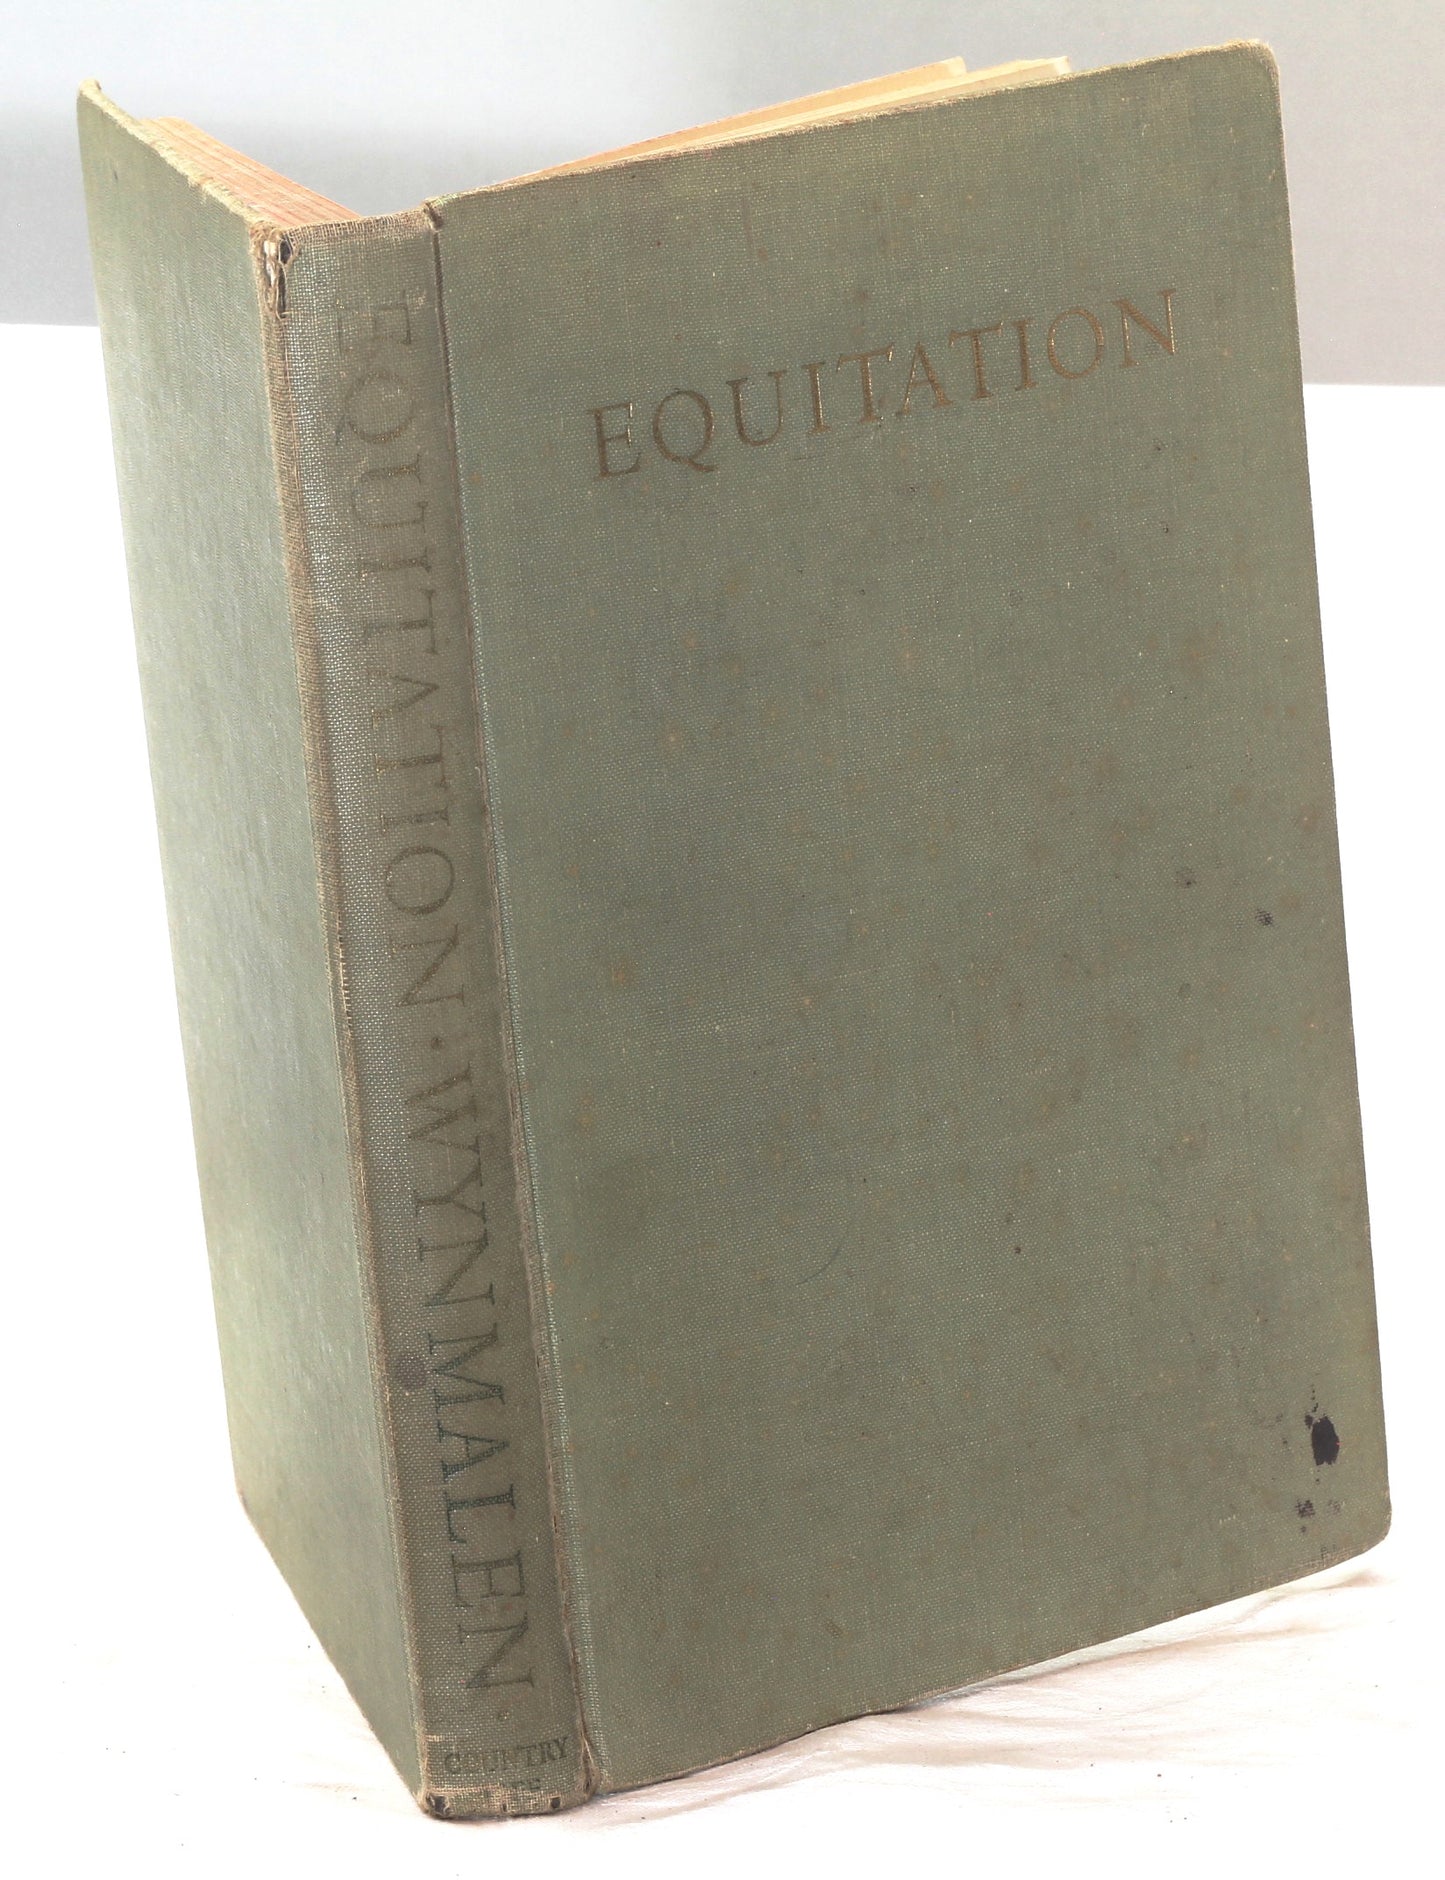 Equitation by Henry Wynmalen, 2nd Ed 1959